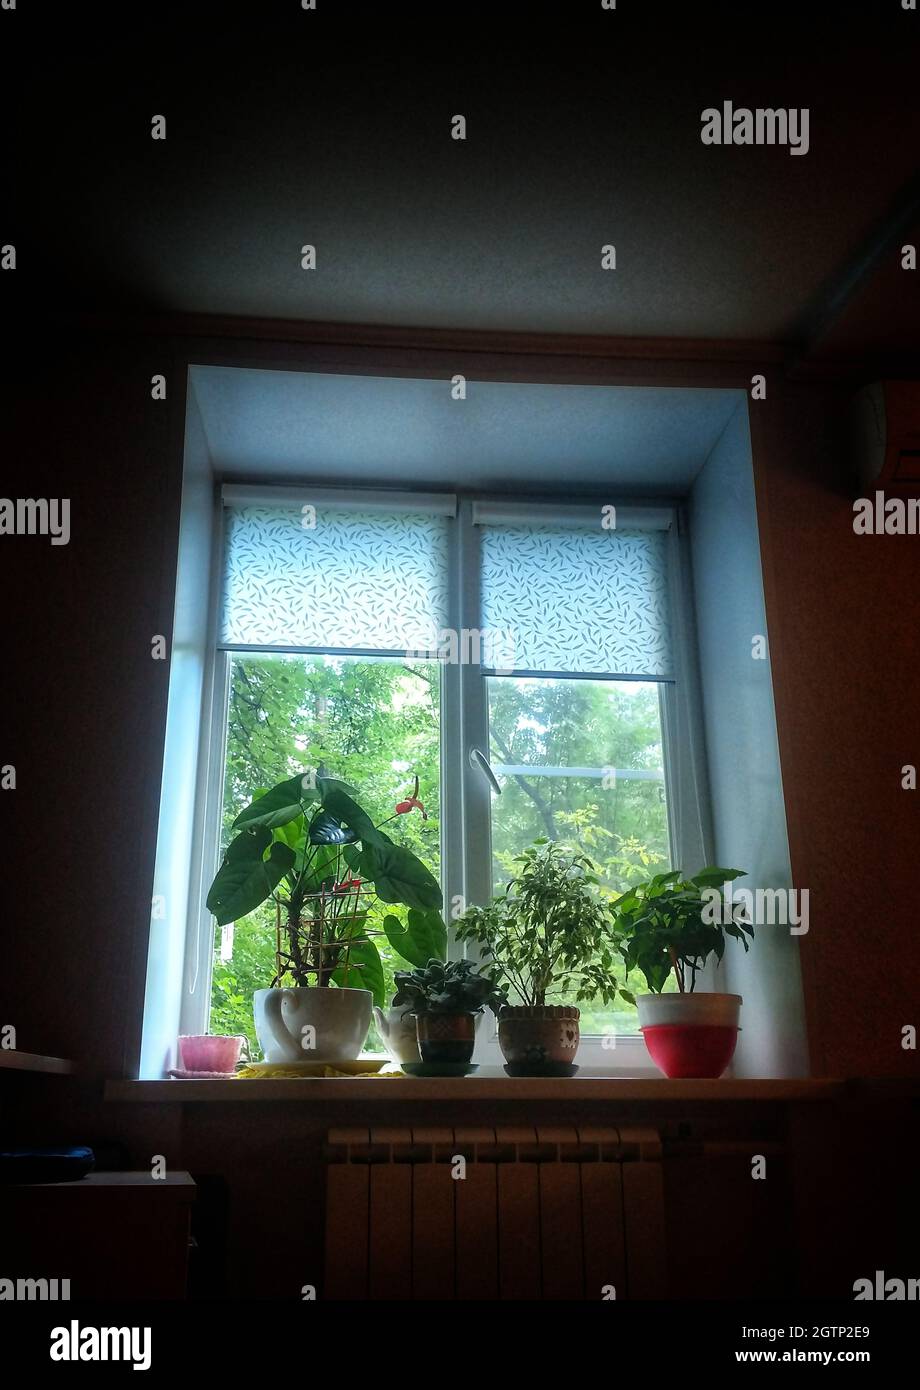 Potted Plants On Window Sill At Home Stock Photo